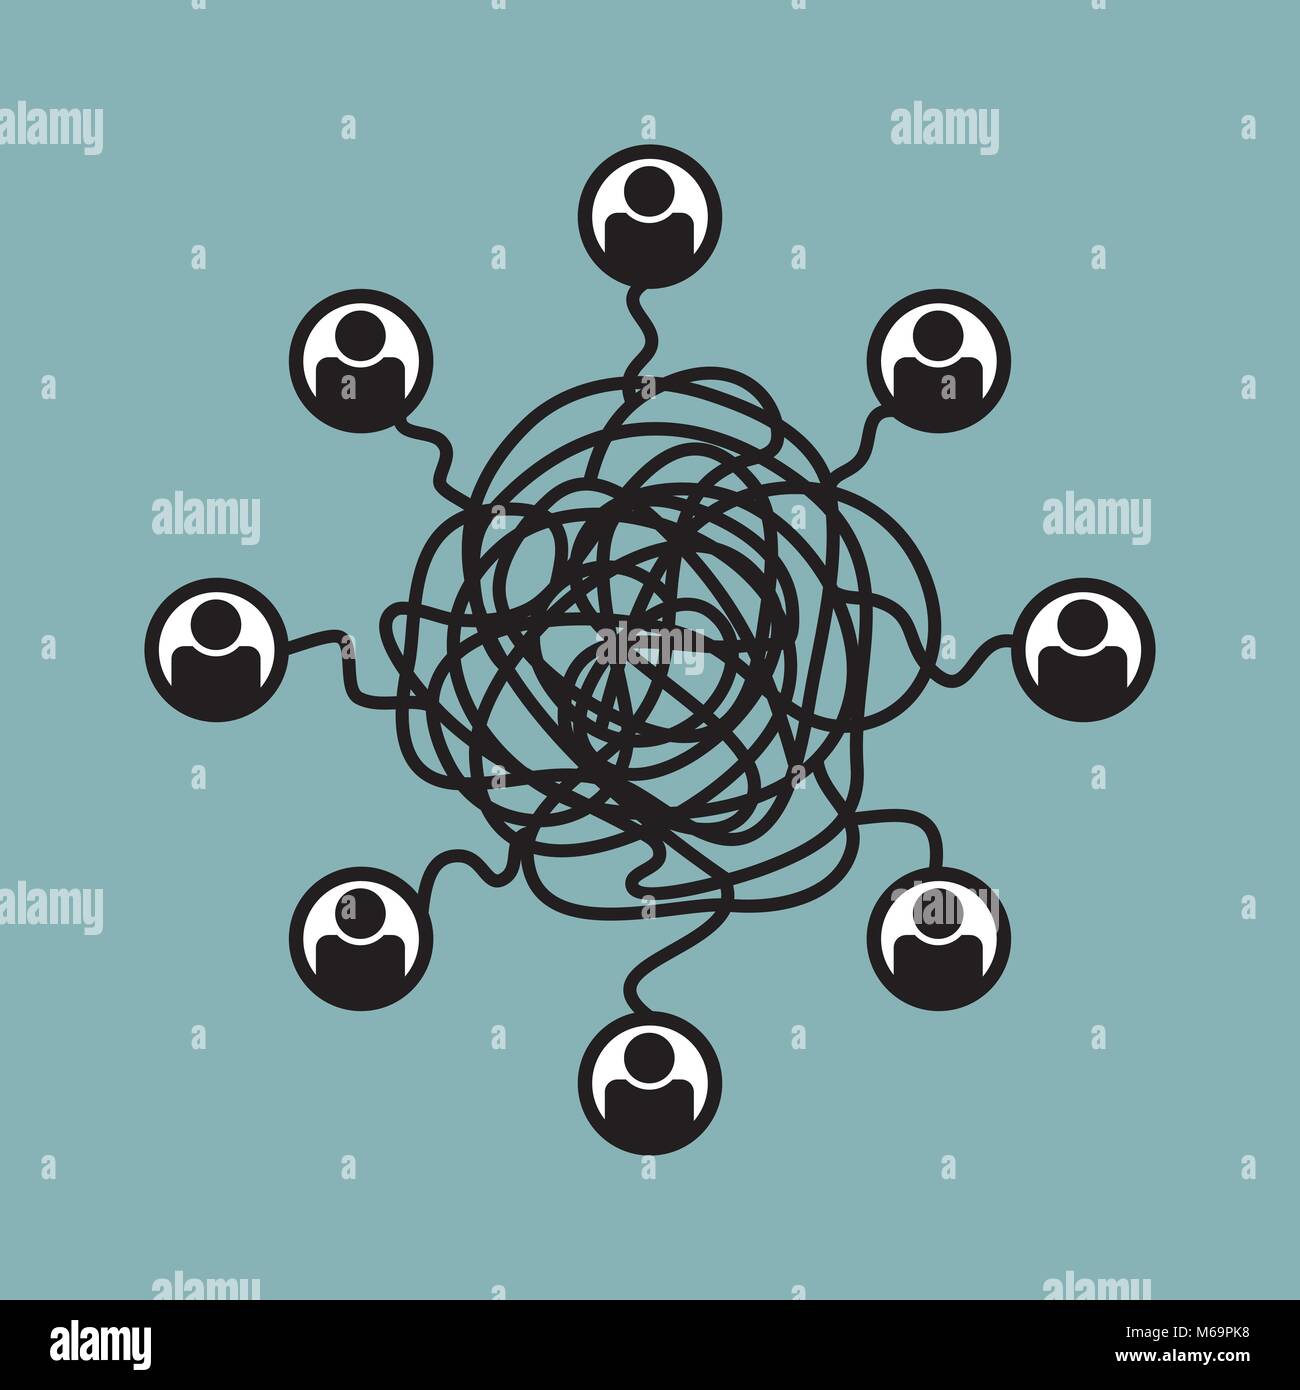 complex personal relations in the group of people Stock Vector